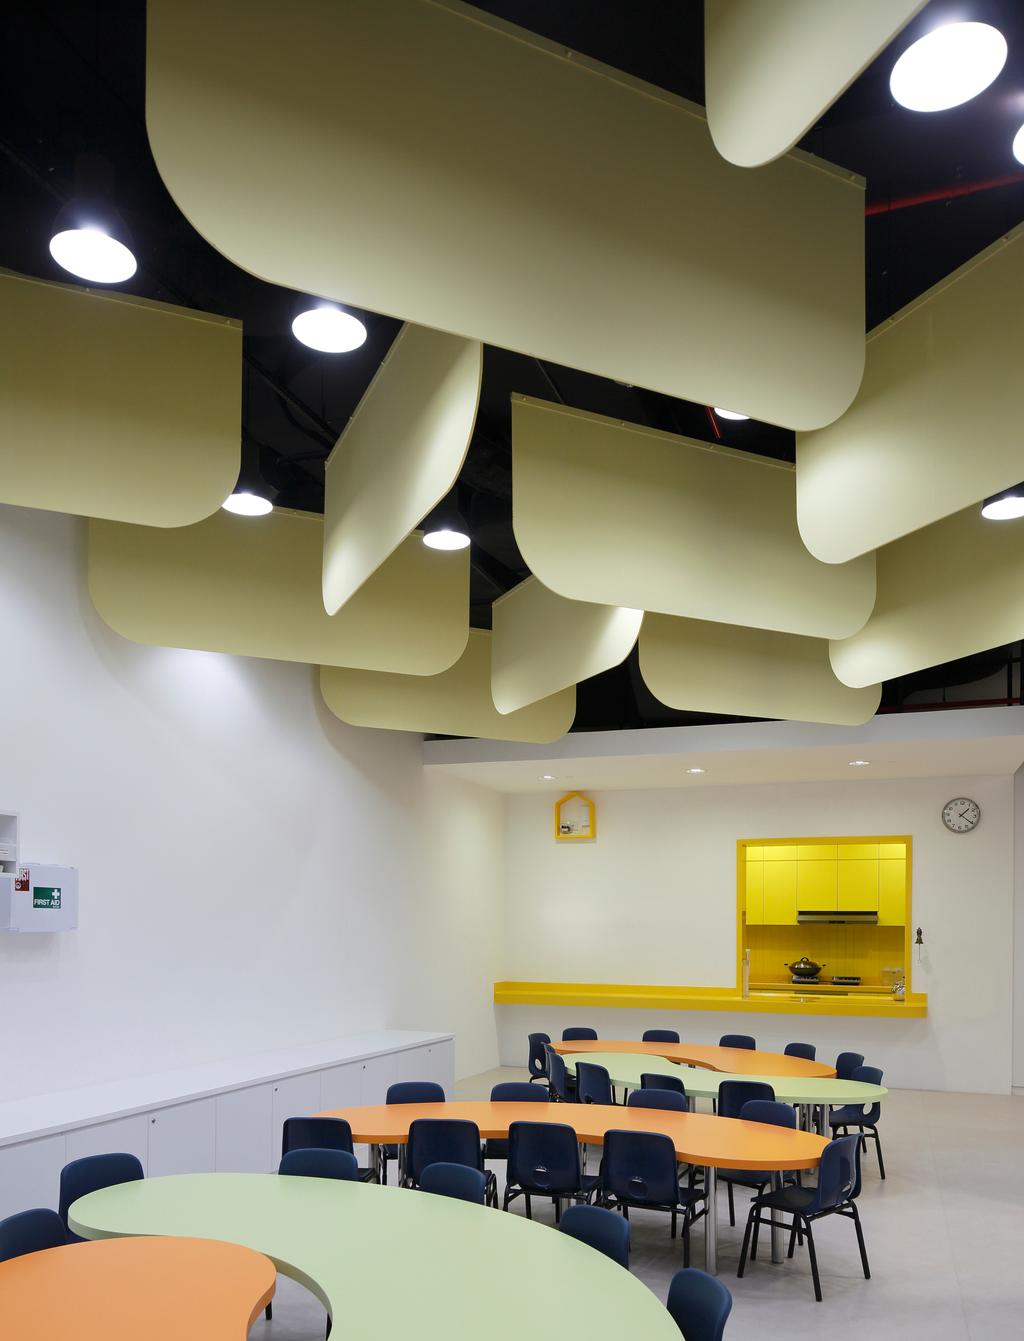 Cove 2 Preschool, Commercial, Architect, Lekker Architects, Contemporary, Yellow Shelf, False Ceiling, Tables, Chairs, Colourful Tables, Hanging Decors, Recessed Lights, Lighting, Indoors, Interior Design